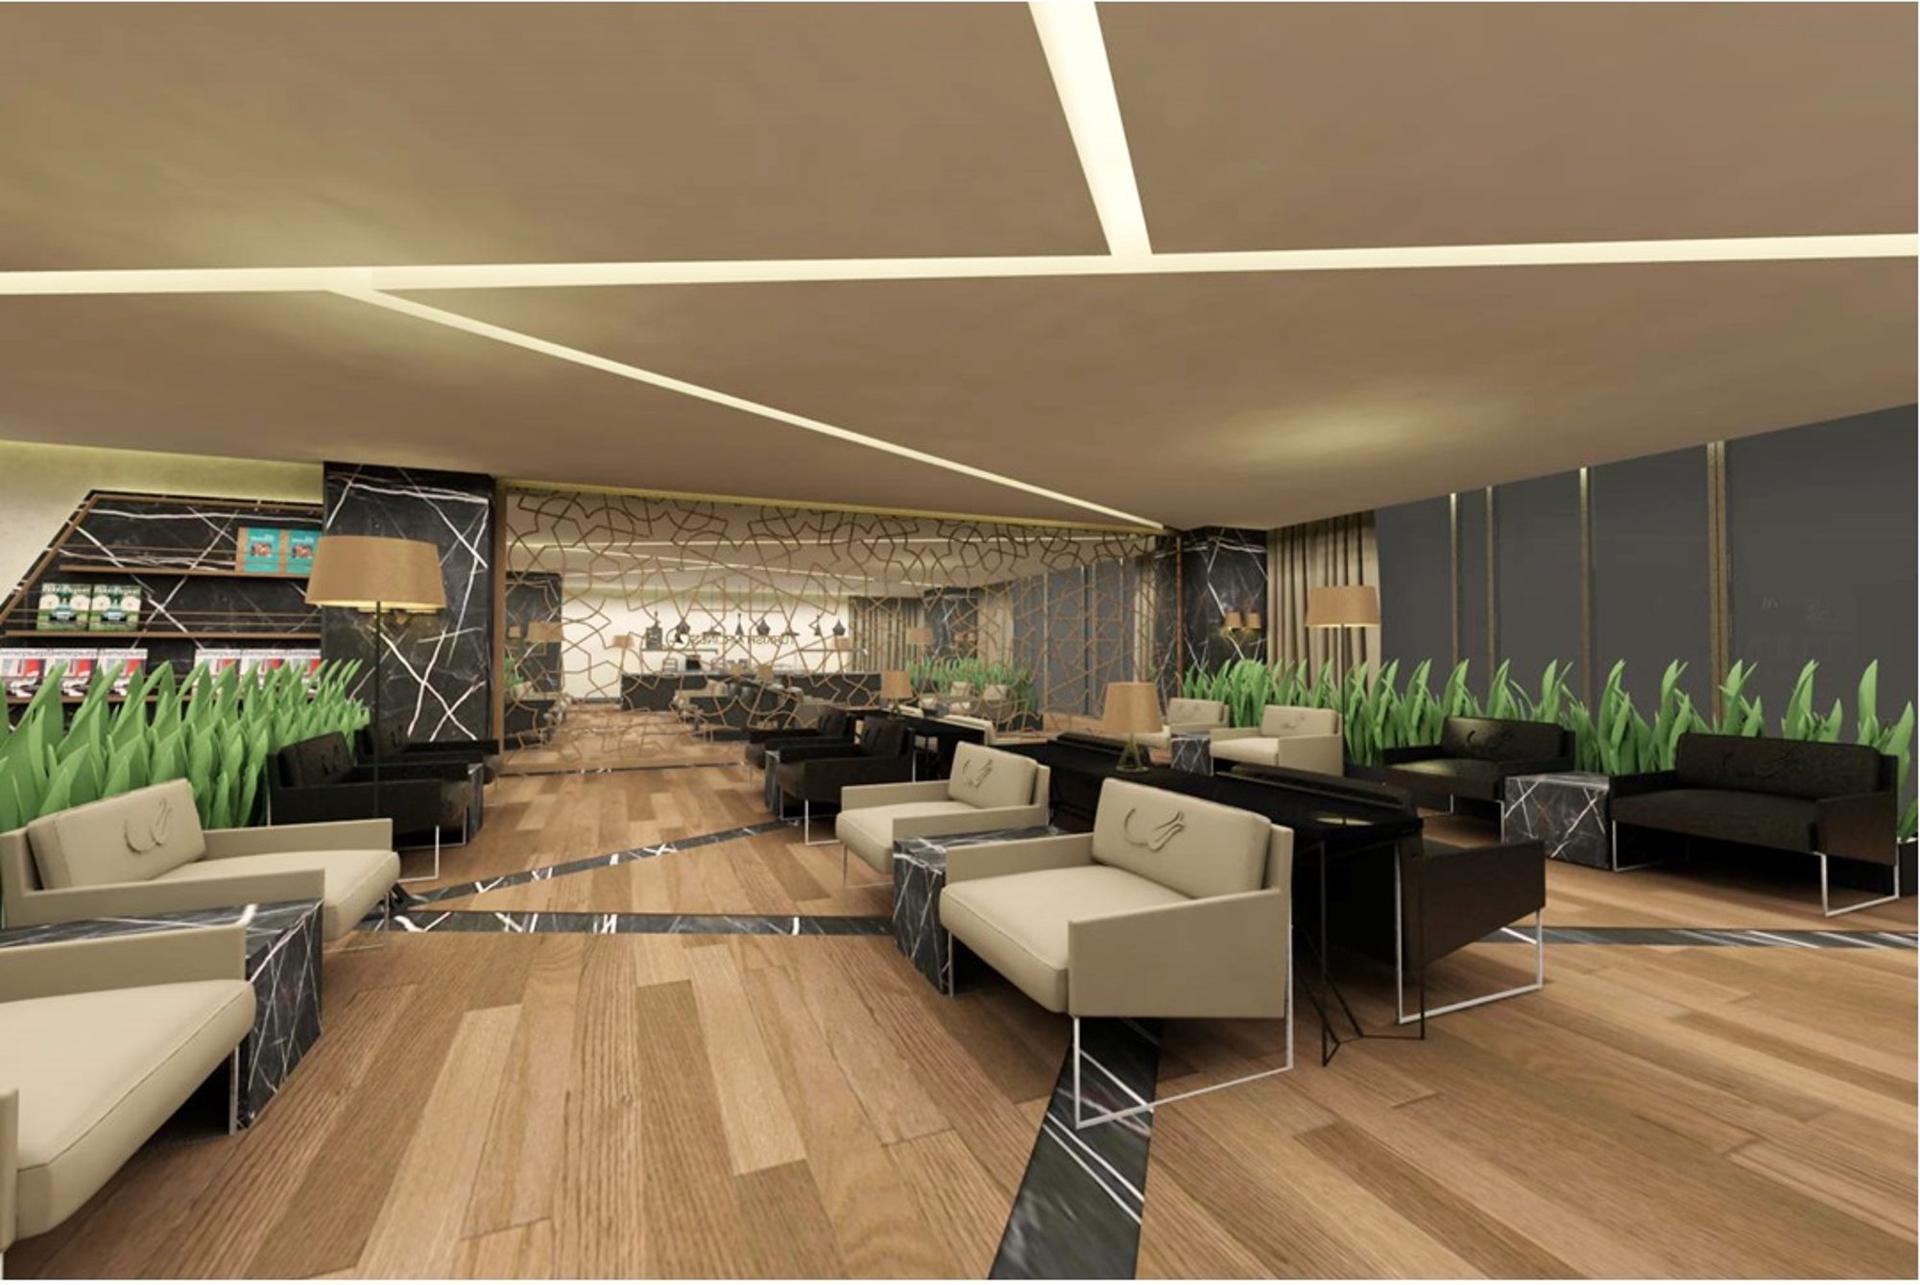 Turkish Airlines CIP Lounge (Business Lounge) image 24 of 27